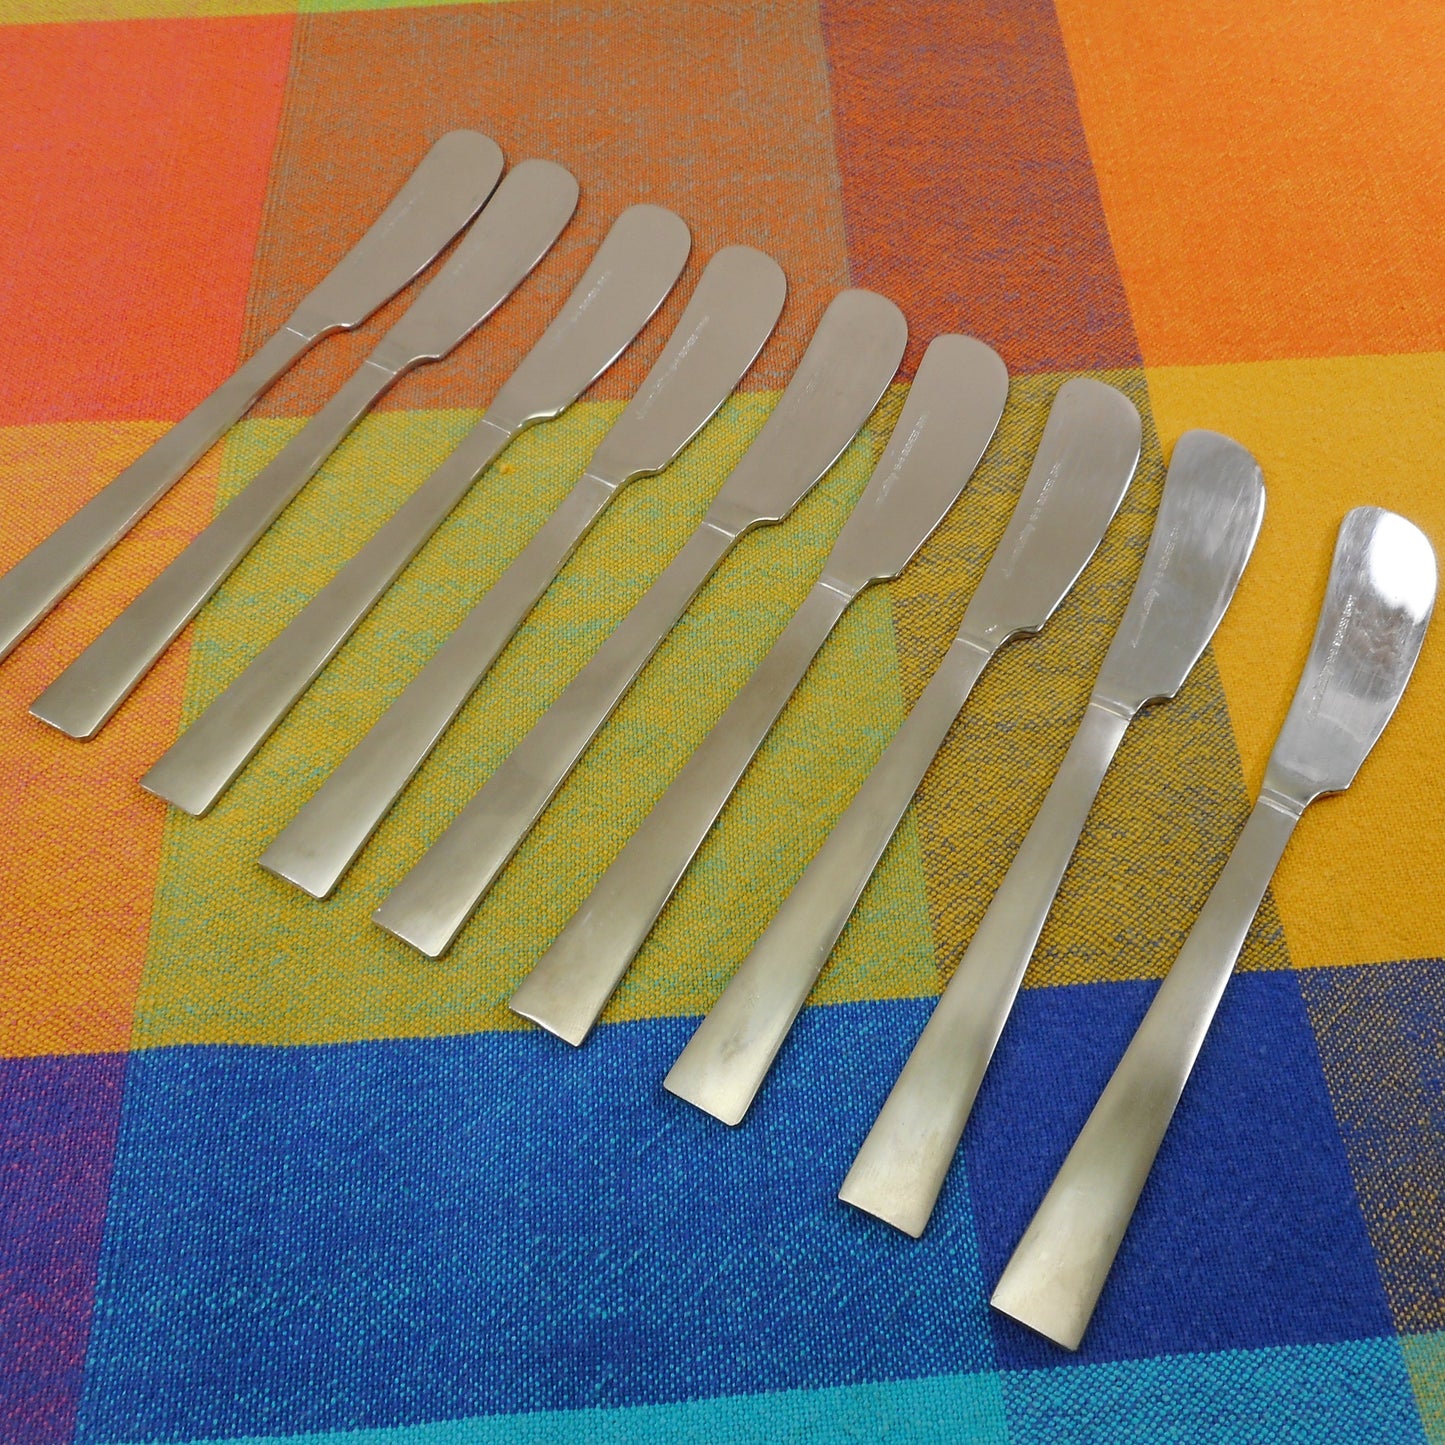 Towle Supreme Cutlery DUCHESS Flat Butter Knives - 9 Lot